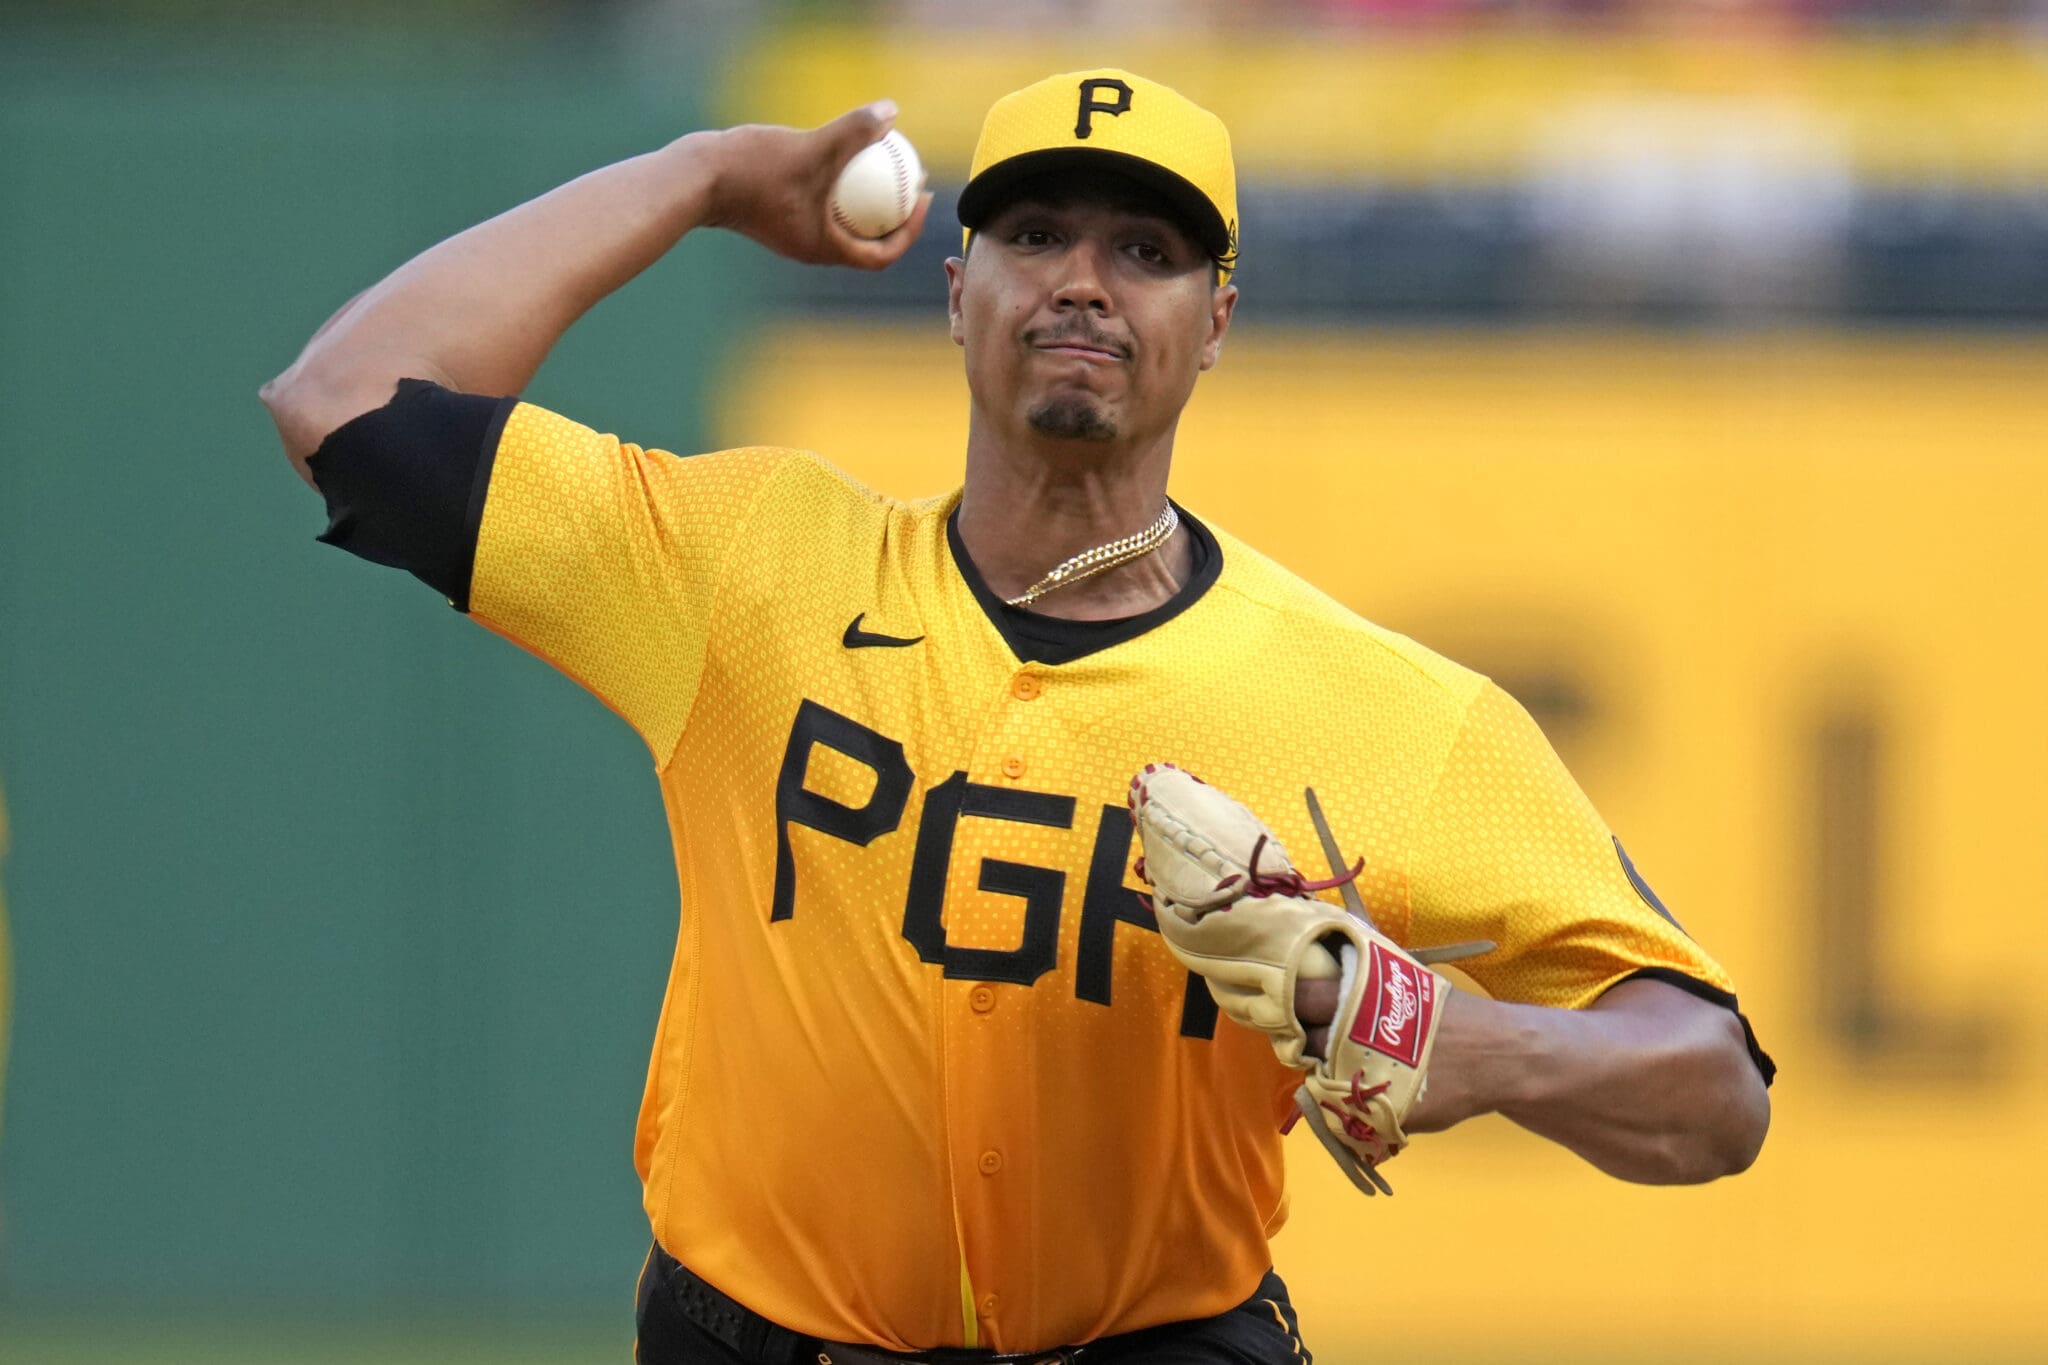 Pittsburgh Pirates starting pitcher Johan Oviedo delivers during the first inning of the team's baseball game against the Cincinnati Reds in Pittsburgh, Friday, Aug. 11, 2023. (AP Photo/Gene J. Puskar)